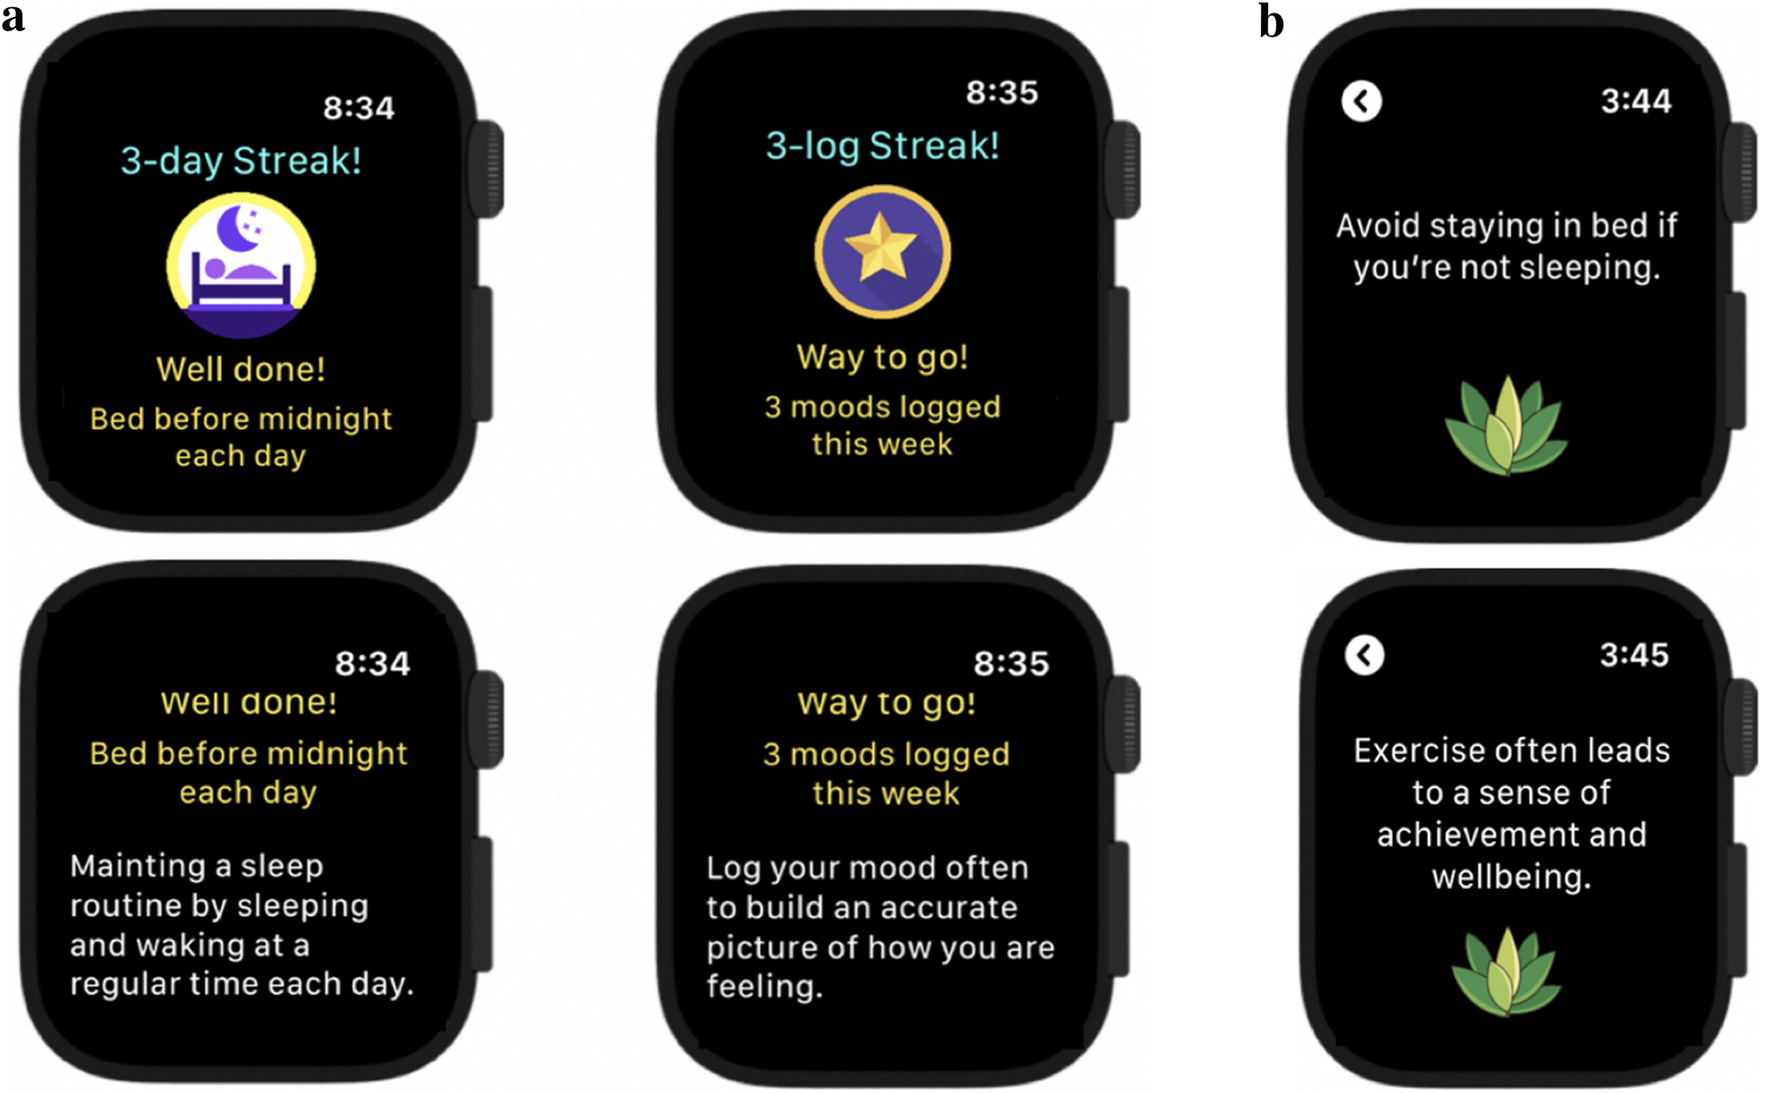 6 smartwatches showing the Silver Cloud app being used for encouraging prompts and tips to stay well.